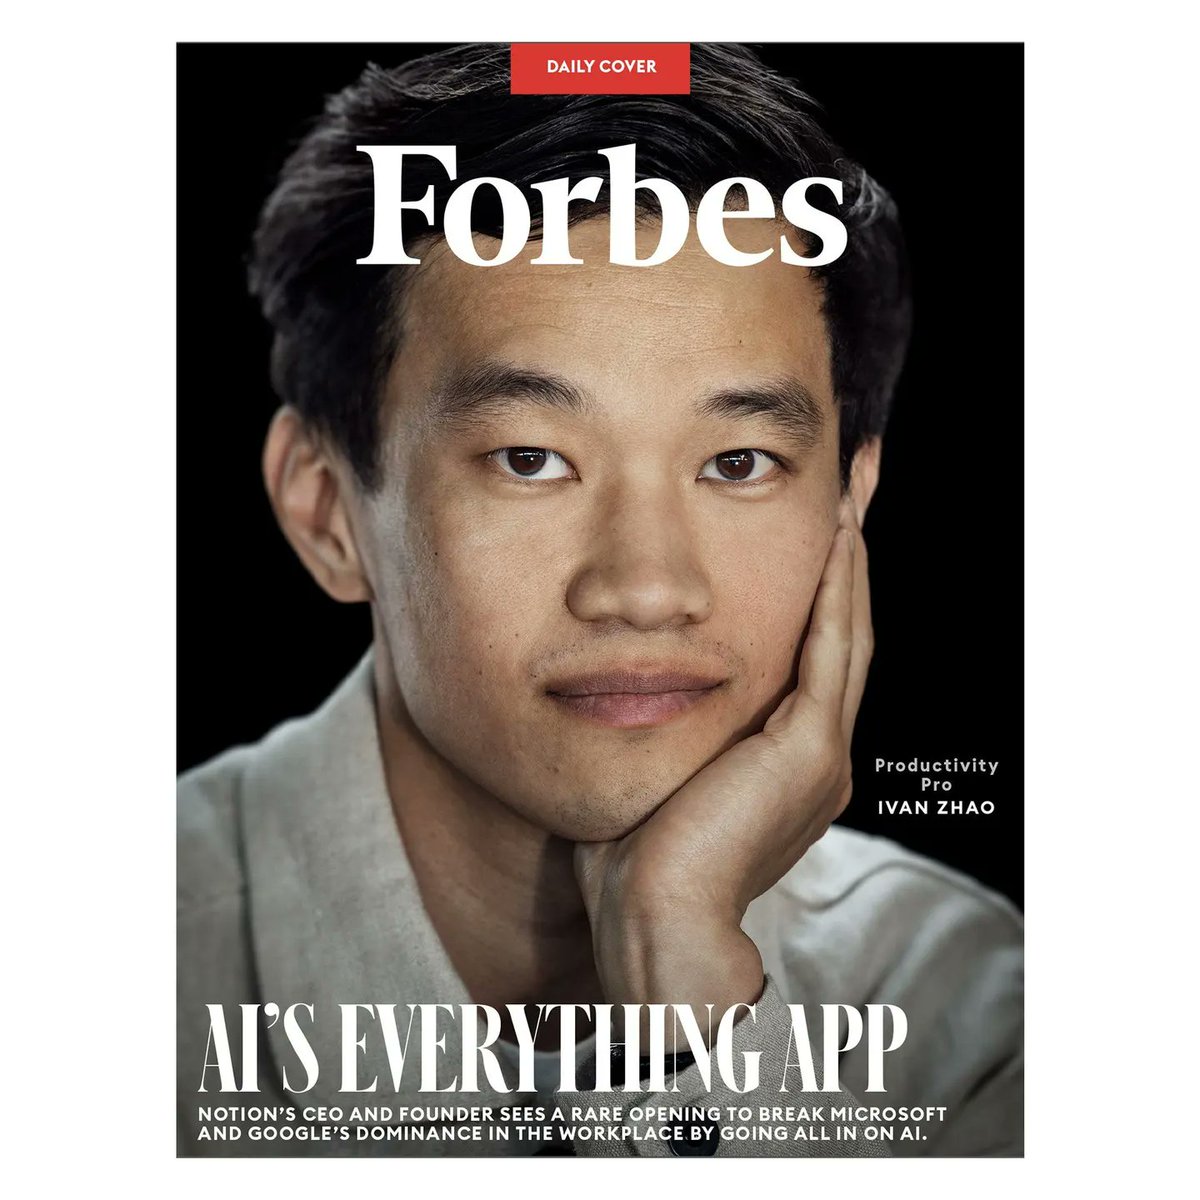 Notion is, even by Silicon Valley standards, idiosyncratic. CEO Ivan Zhao picks out all the furniture at HQ and for years had a no-shoes policy. My latest magazine profile looks at @ivanhzhao's big AI bet, which earned @NotionHQ a spot on #ForbesAI50: forbes.com/sites/kenrickc…